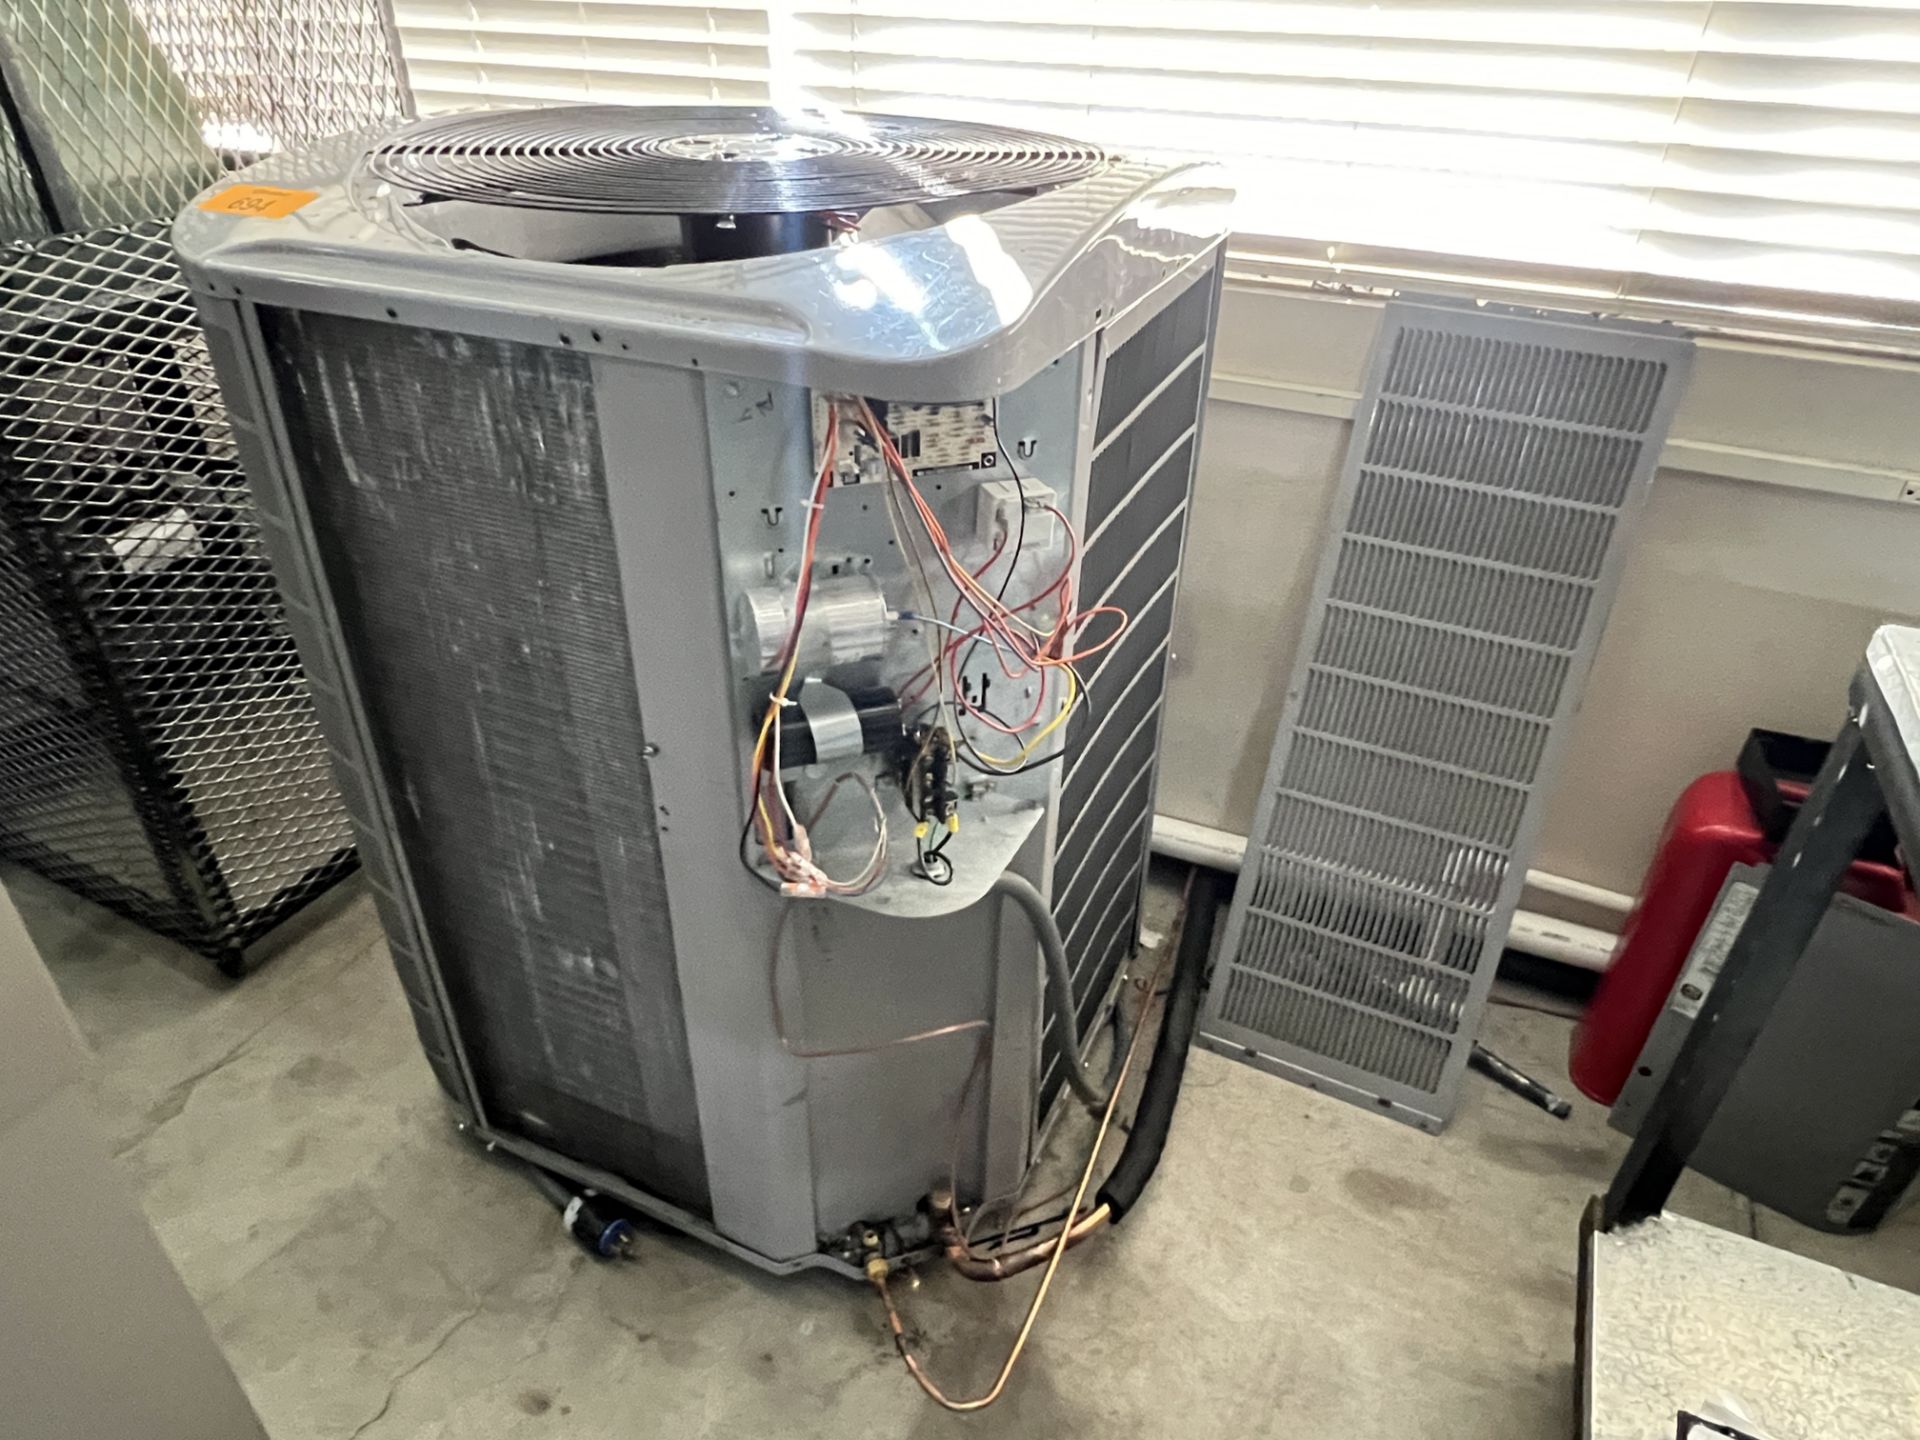 Residential Central Air Conditioner Condenser/Heat Pump - Image 3 of 6